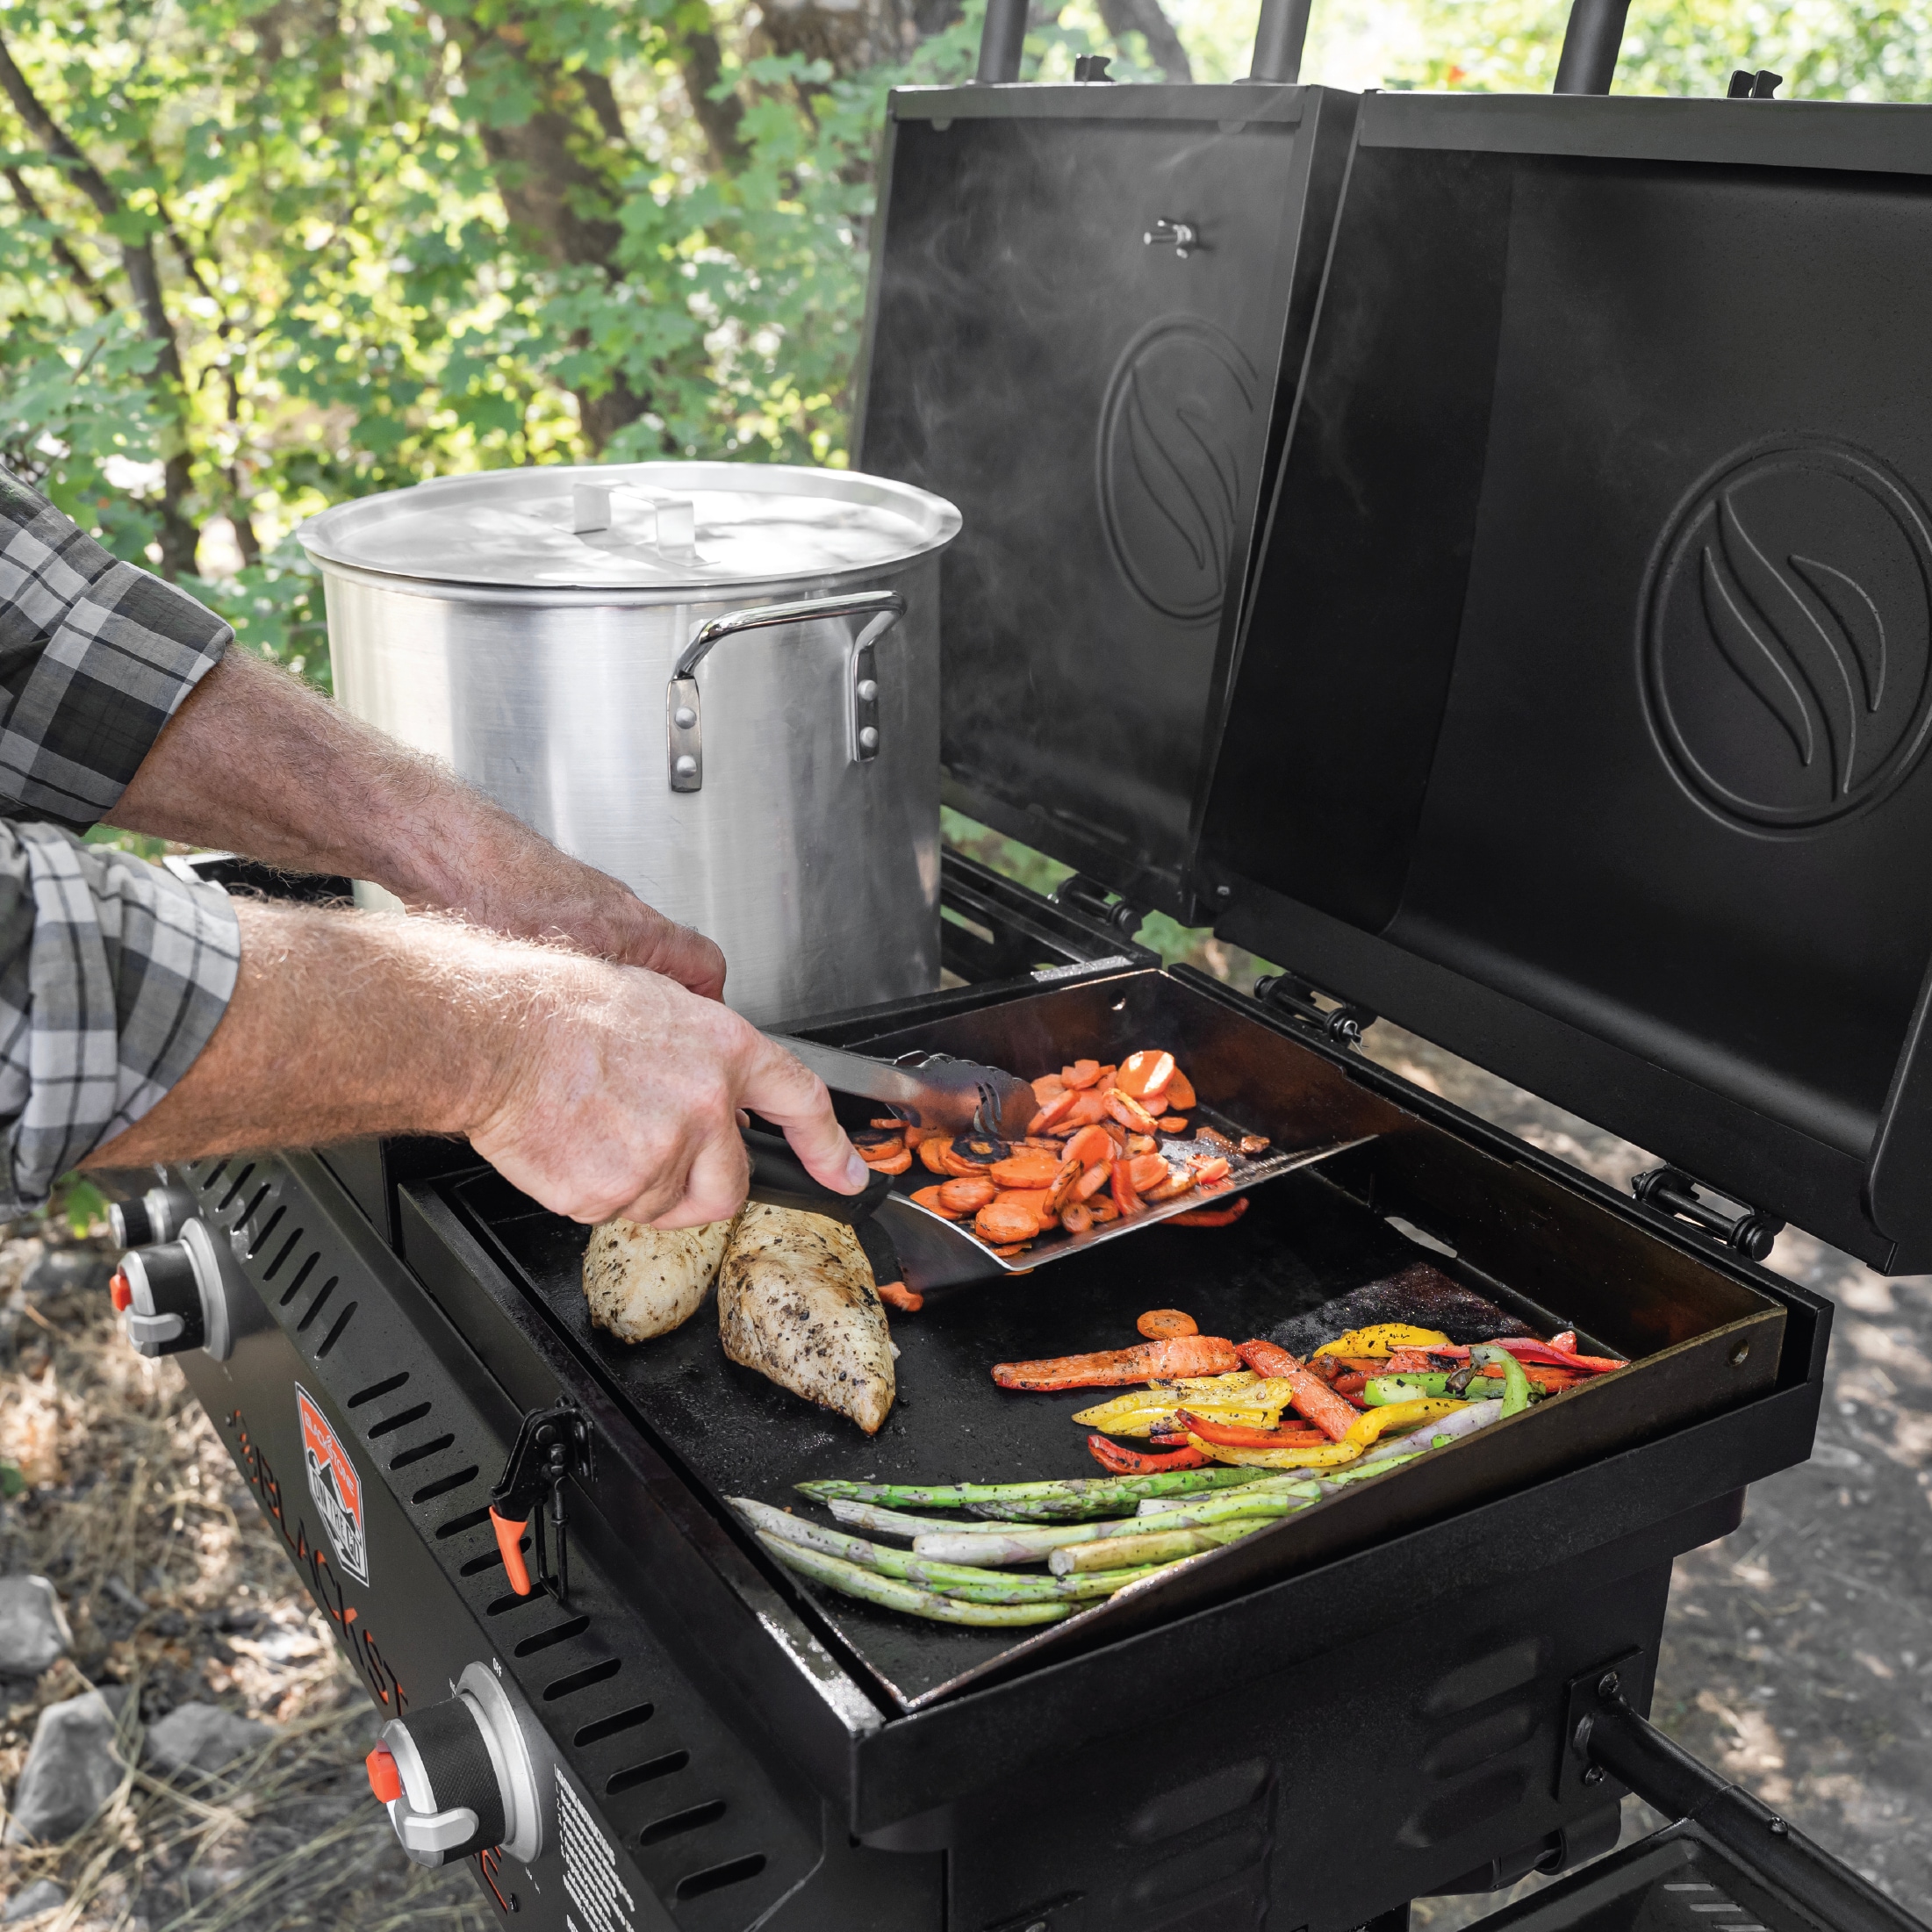 Blackstone Tailgater Stainless Steel 2 Burner Portable Gas Grill